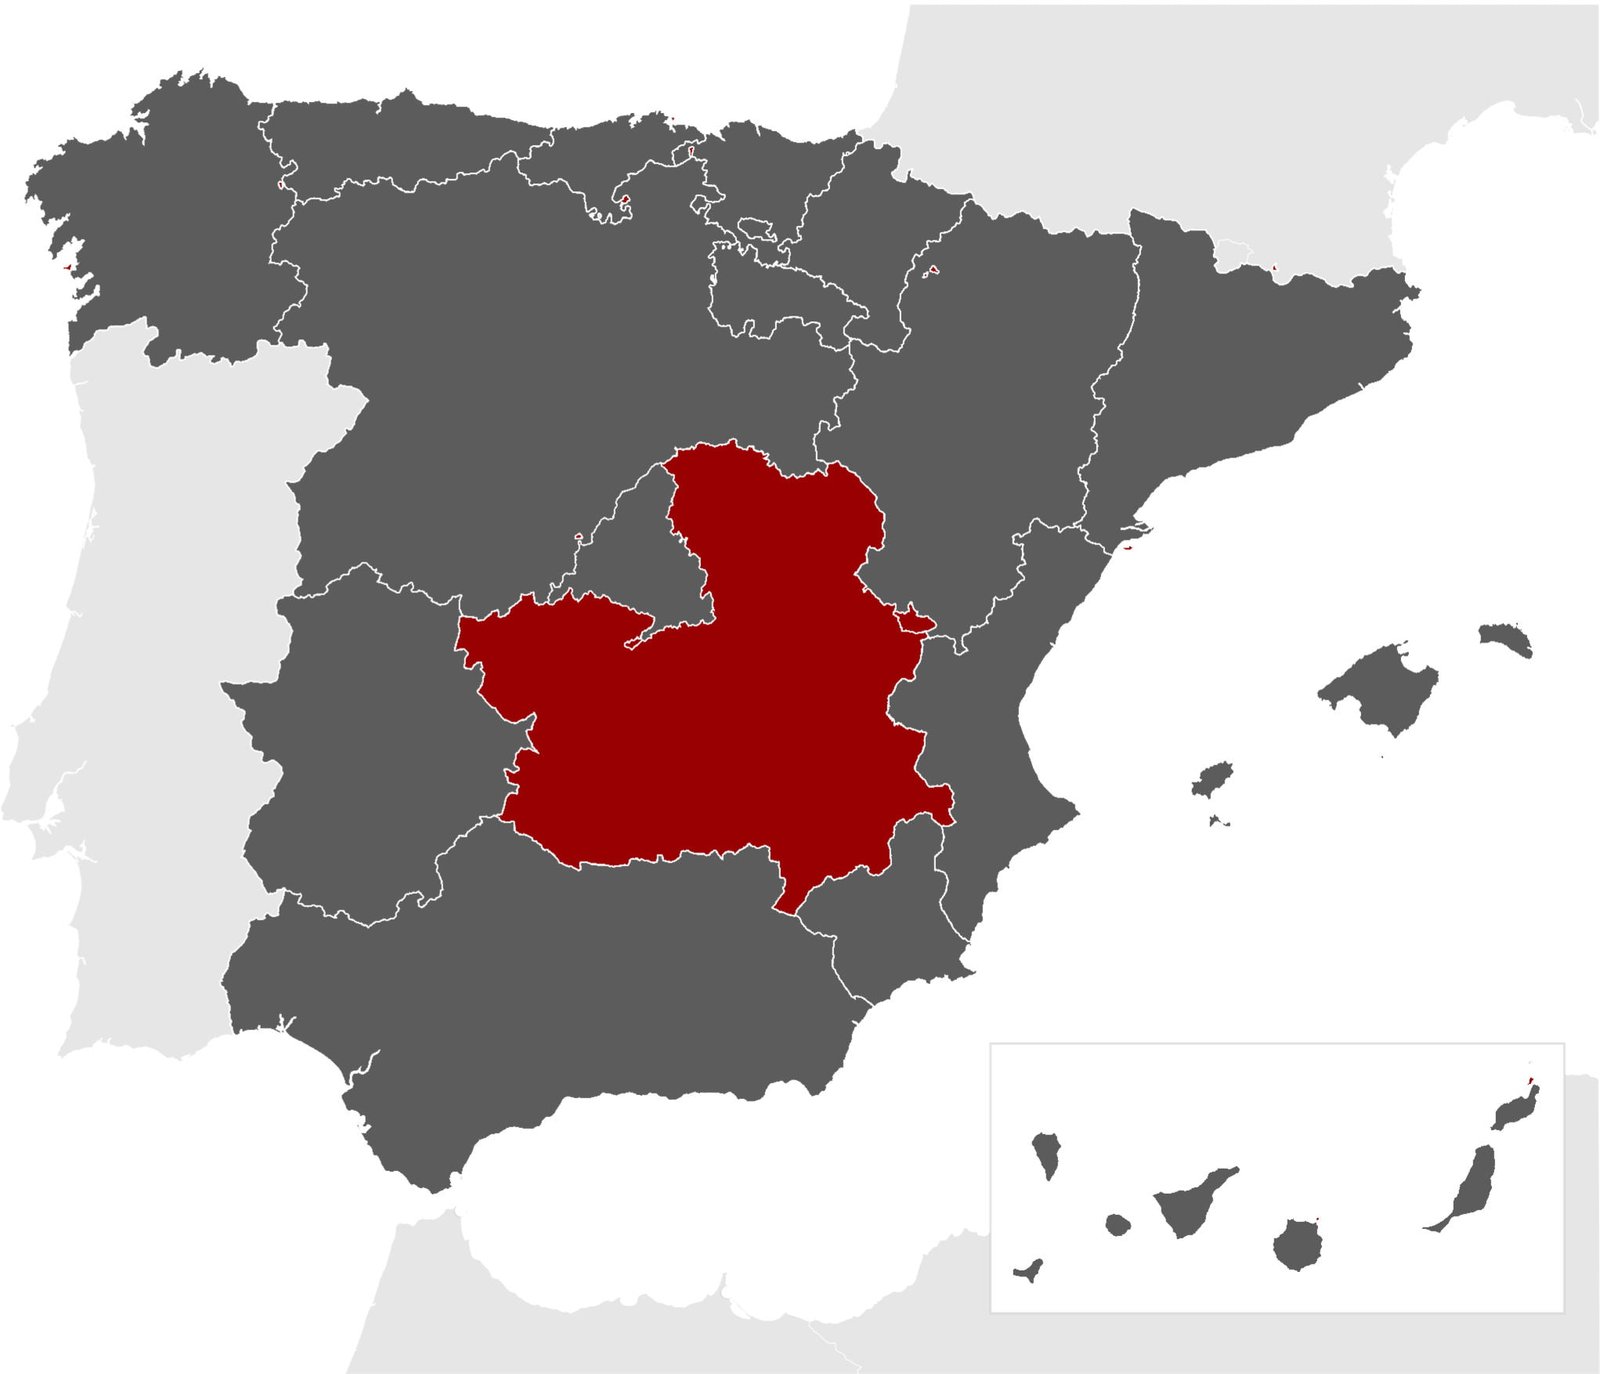 A infographic of Spain showing the region of Castilla-La Mancha highlighted in red